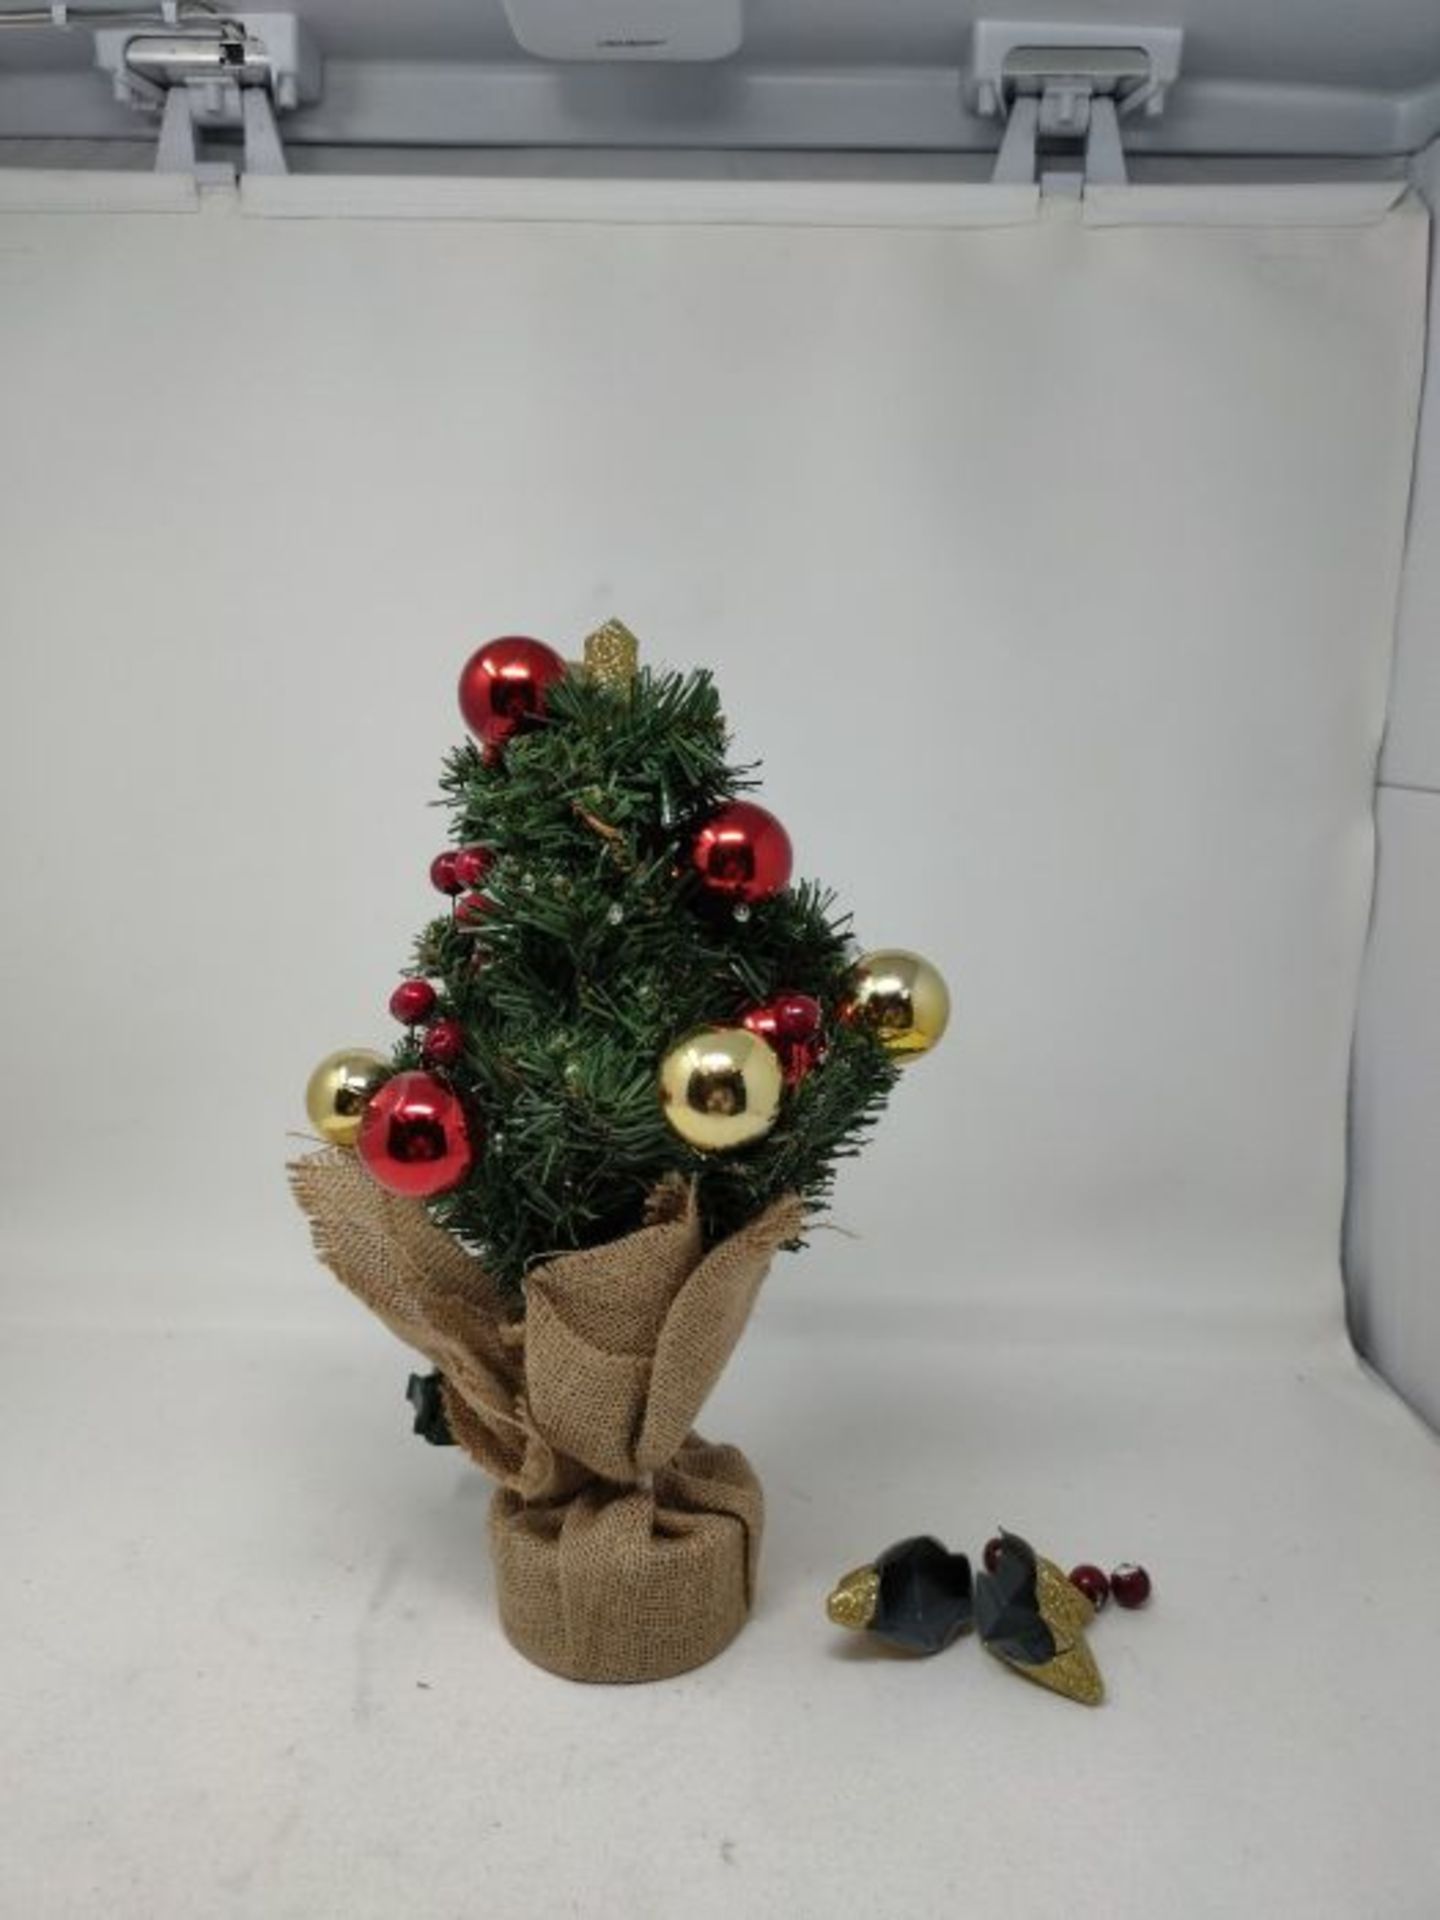 [CRACKED] Yorbay Small Christmas Tree with 20 LED Light Baubles Star Topper 40cm Batte - Image 2 of 3